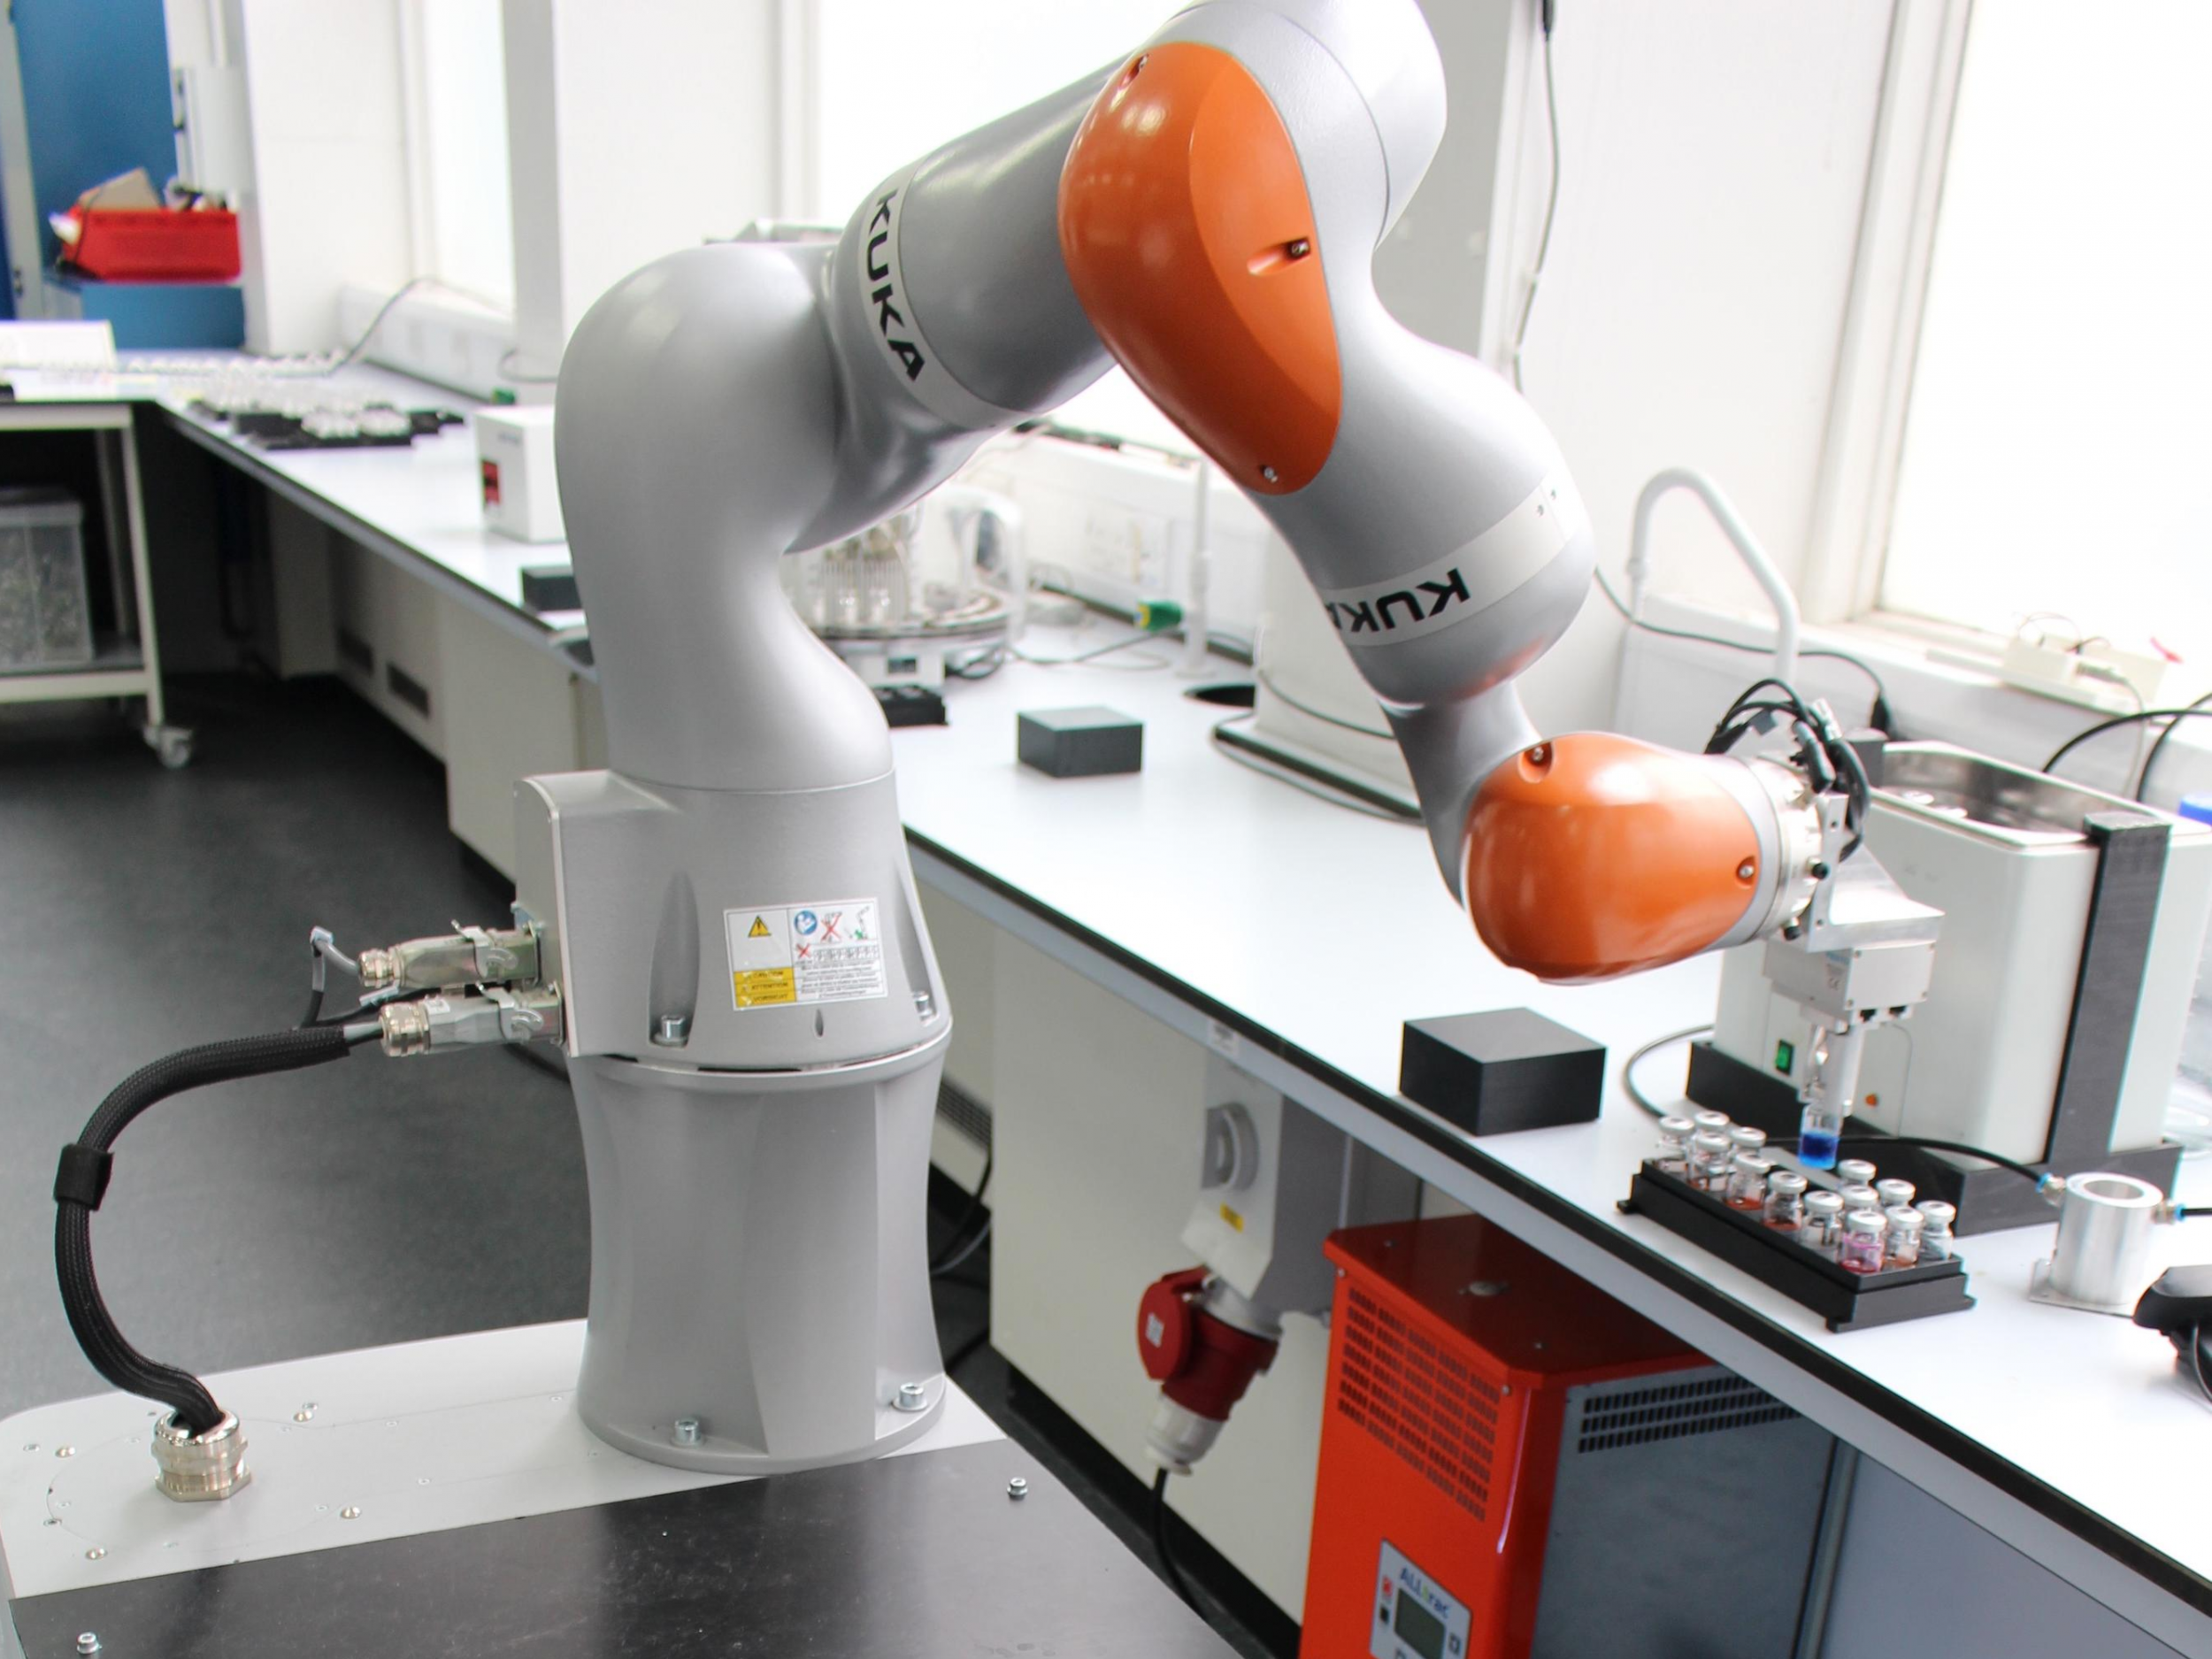 The robot chemist developed at the University of Liverpool can carry out experiments 24/7.